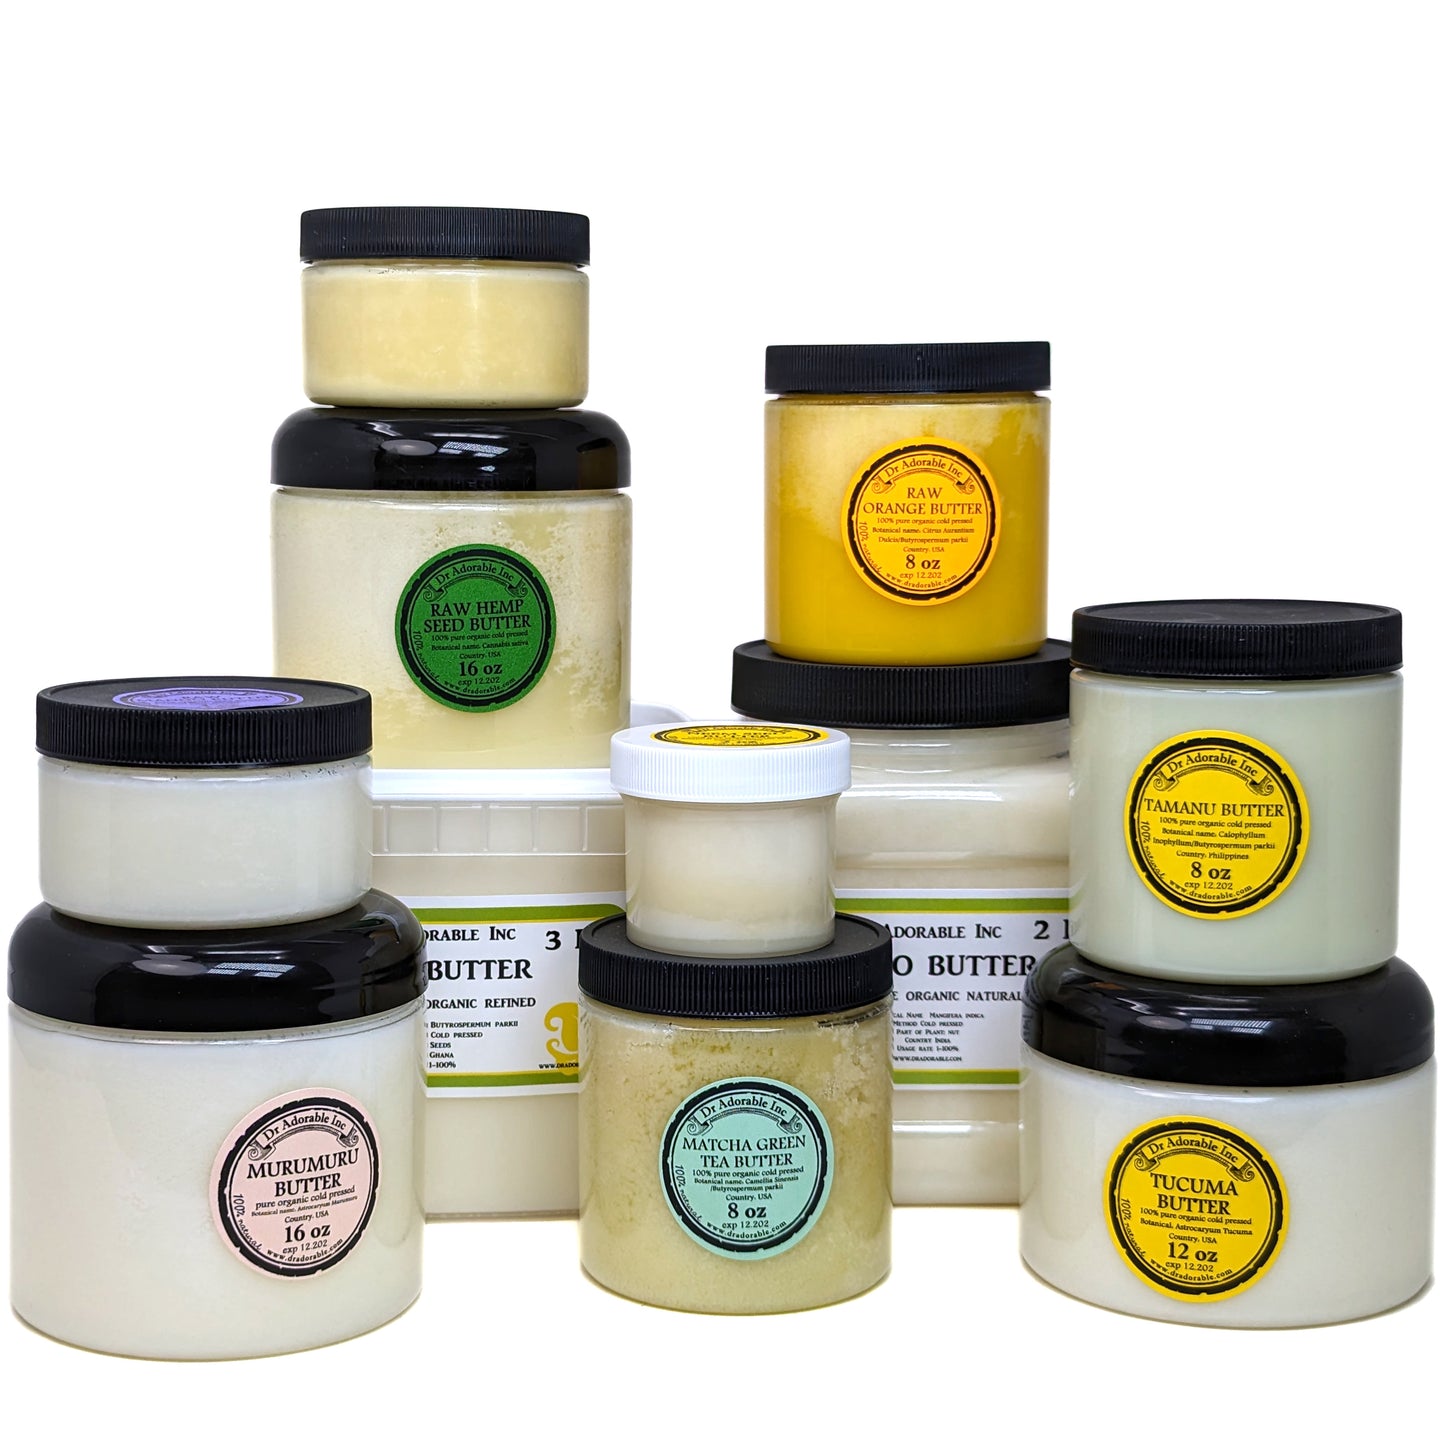 Avocado Butter - Refined Pure Natural Organic Raw